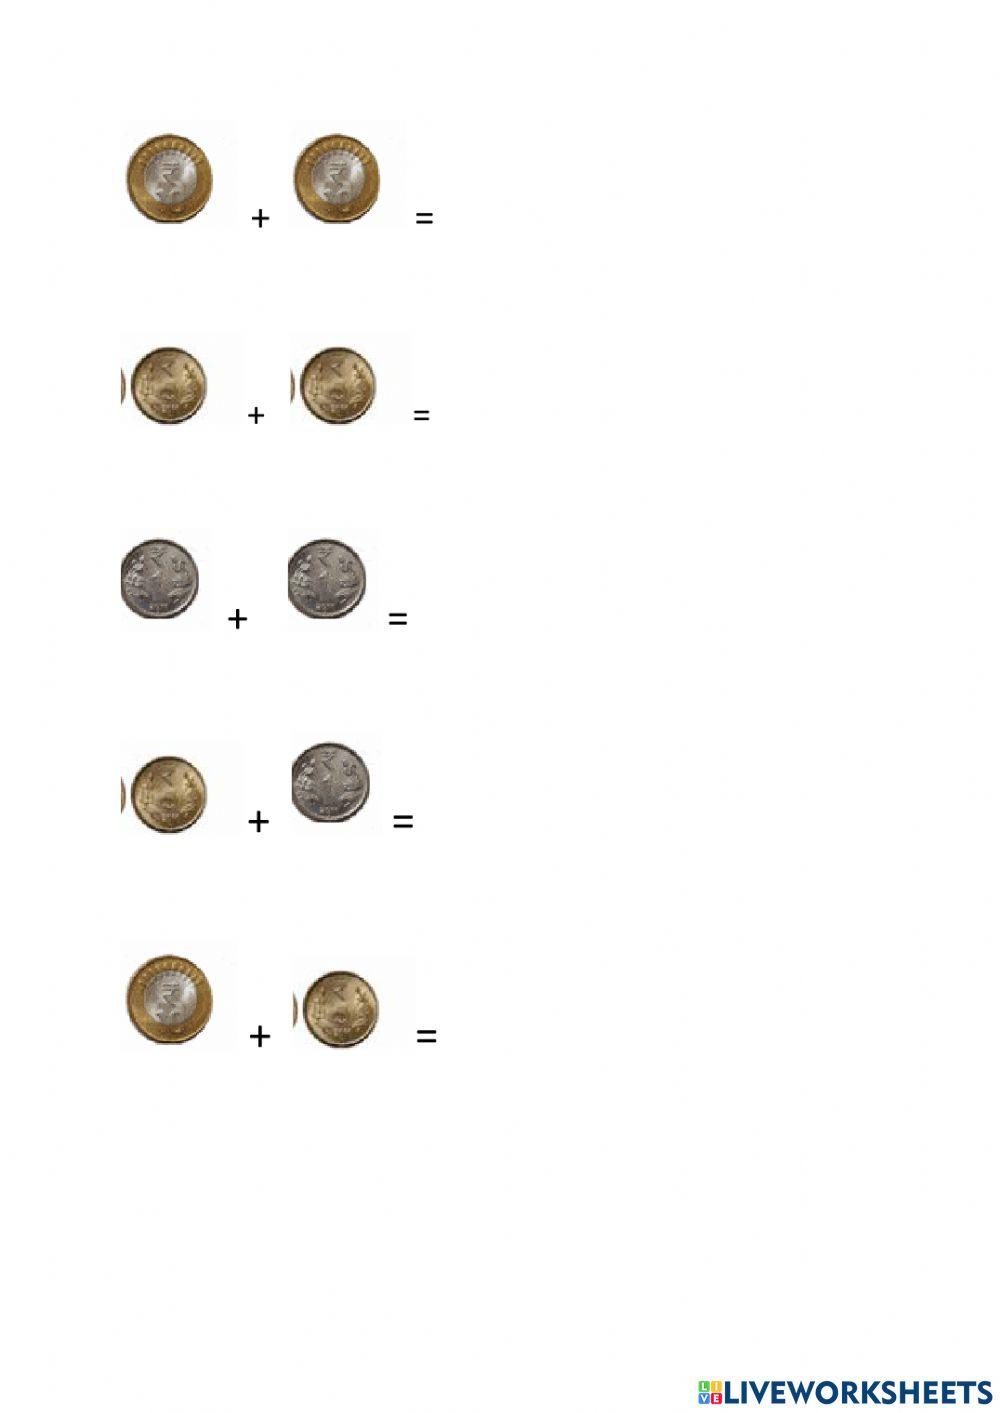 Addition of coins